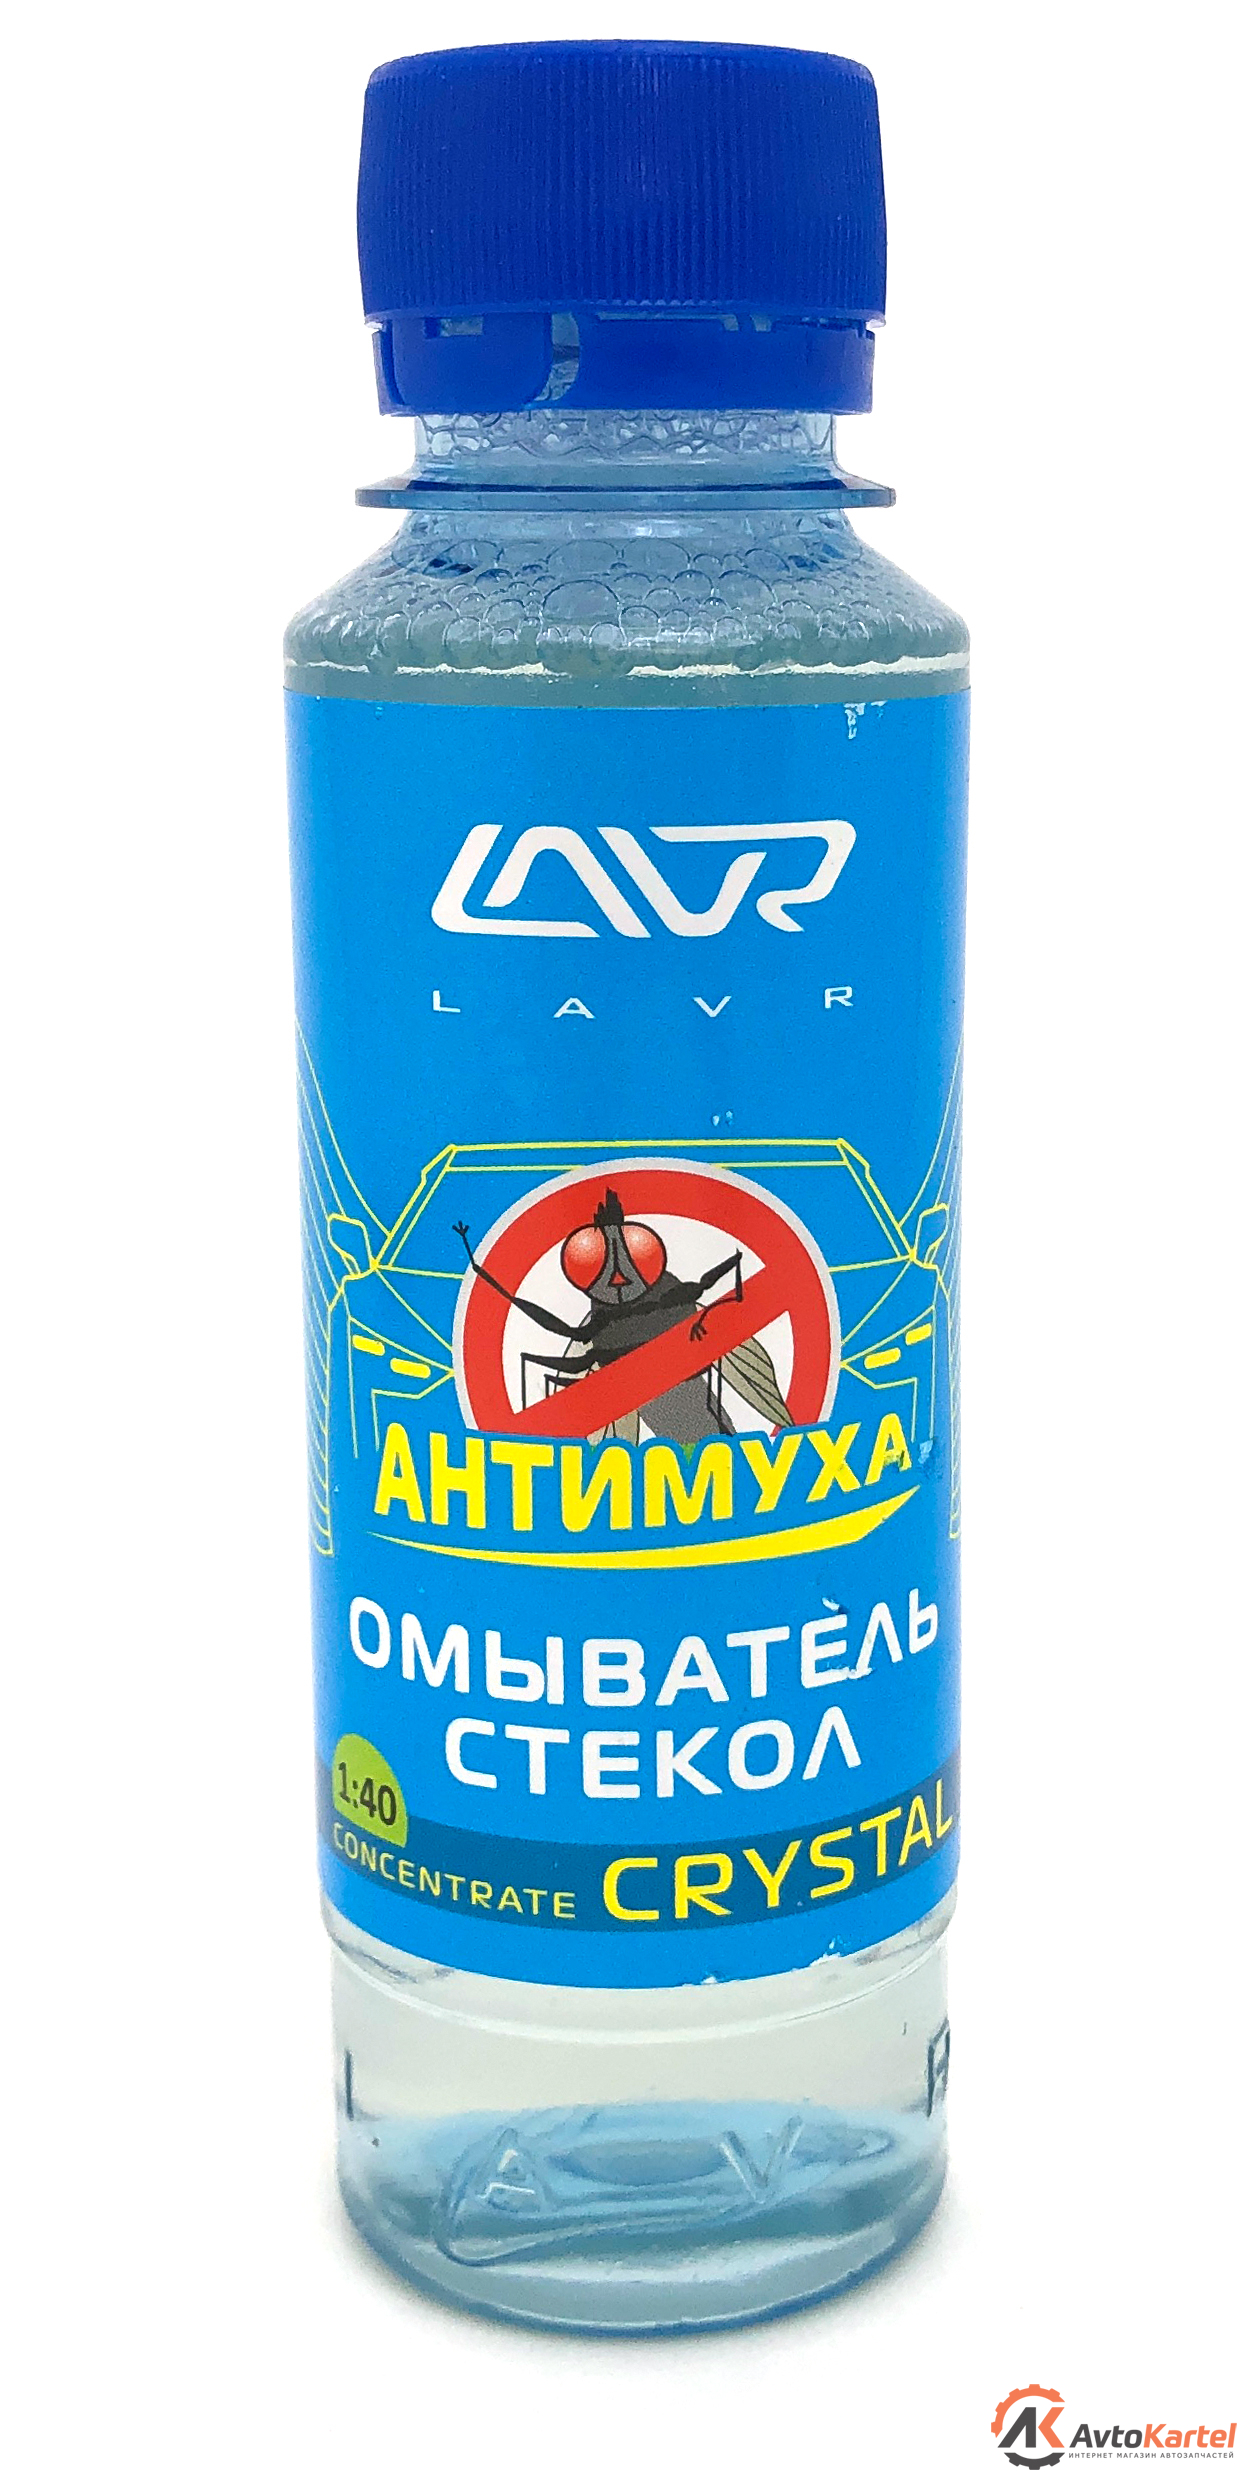 Омыватель стекол  концентрат Анти Муха Crystal    Glass Washer Concentrate Anti Fly 120мл